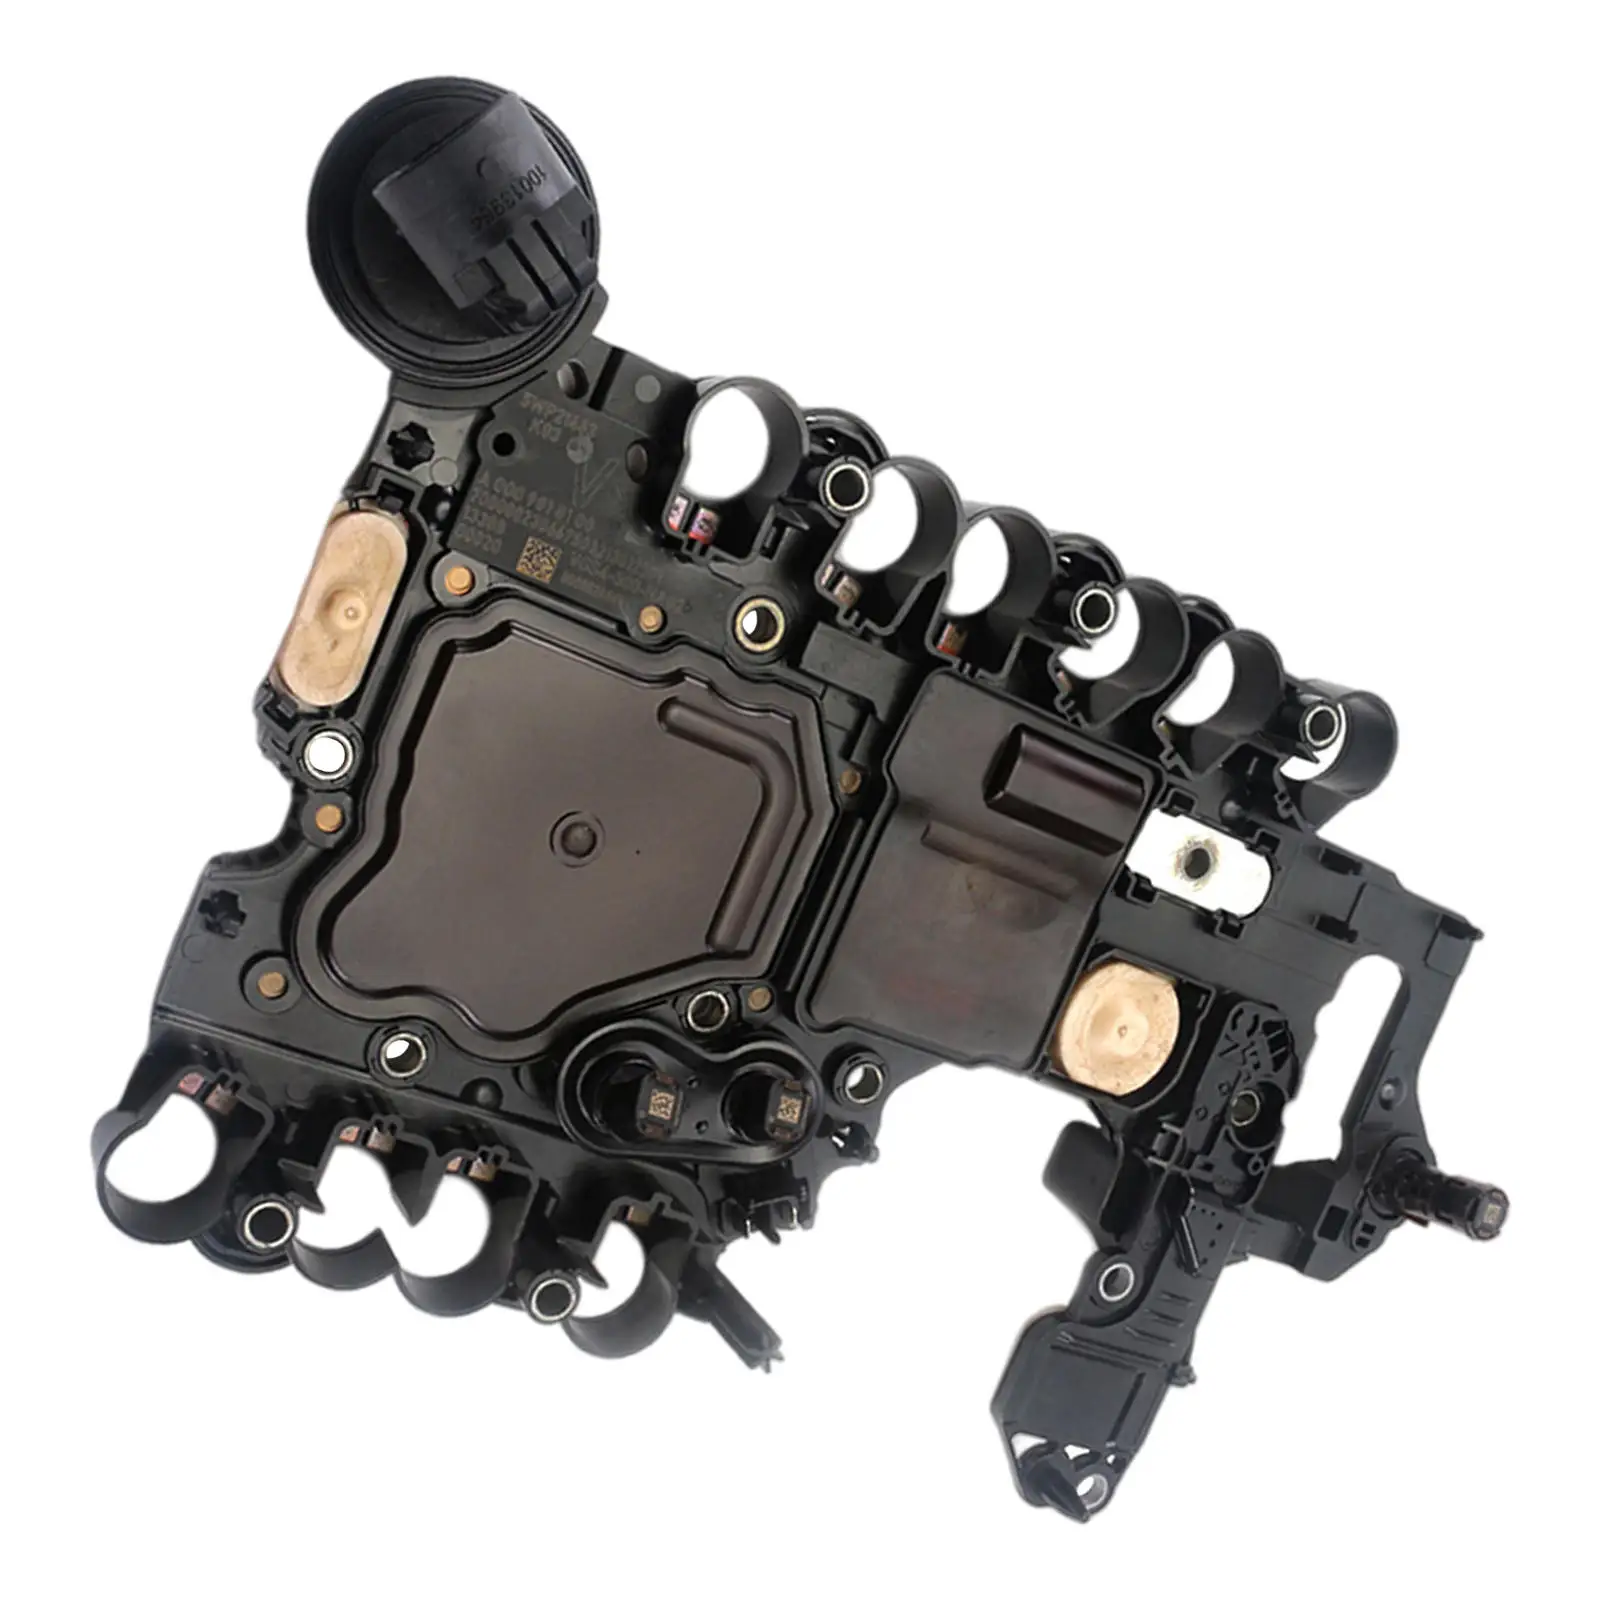 Tcu Transmission Control Unit Conductor Plate 722.4 for Benz ACC Replacement Parts Easy to Install